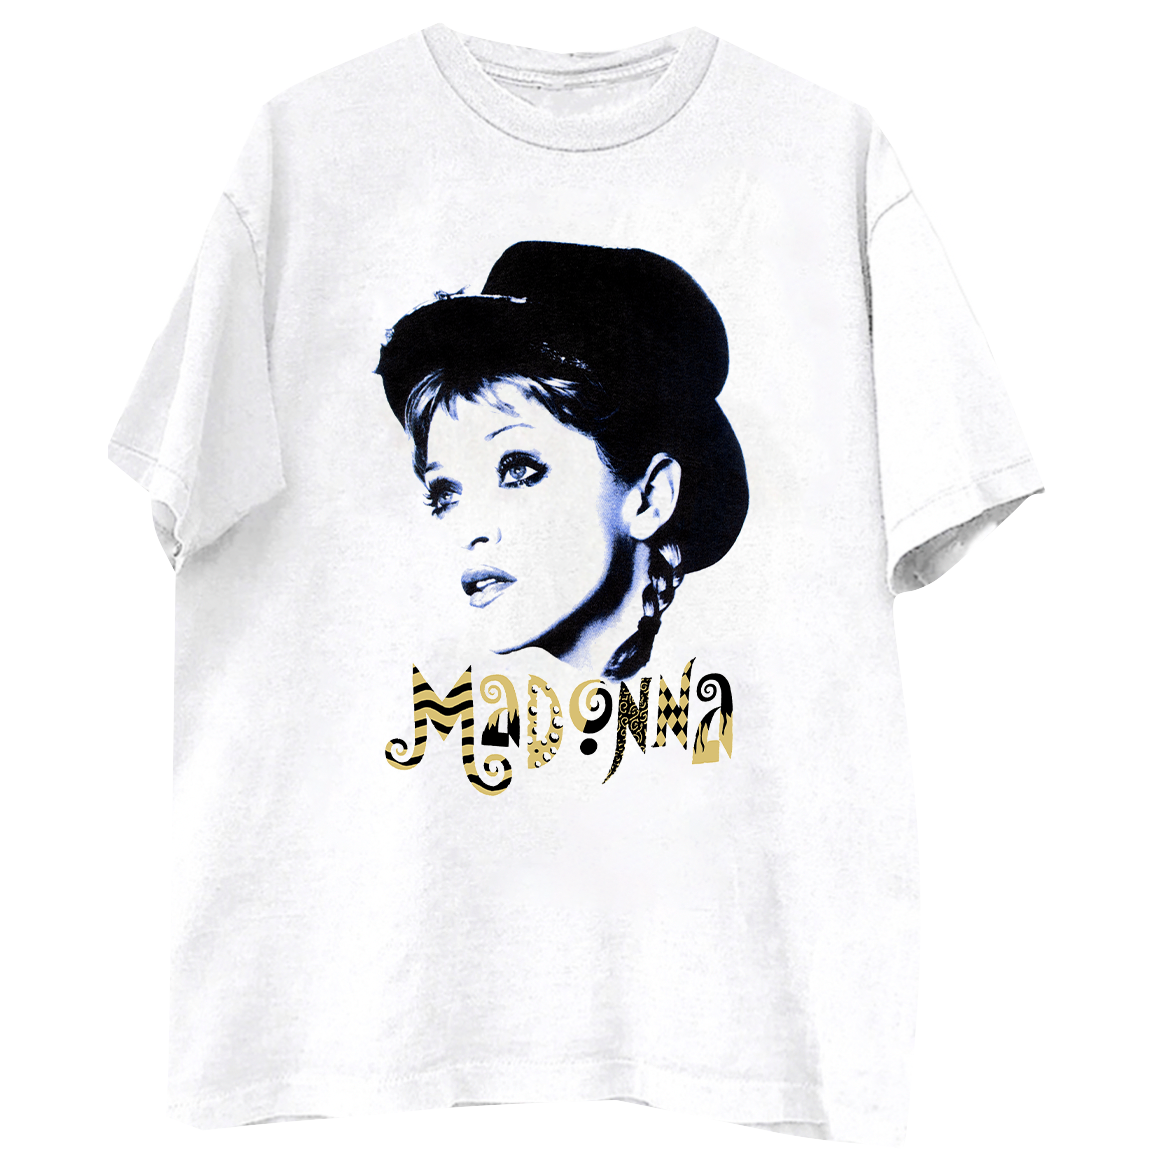 The Girlie Show T-Shirt